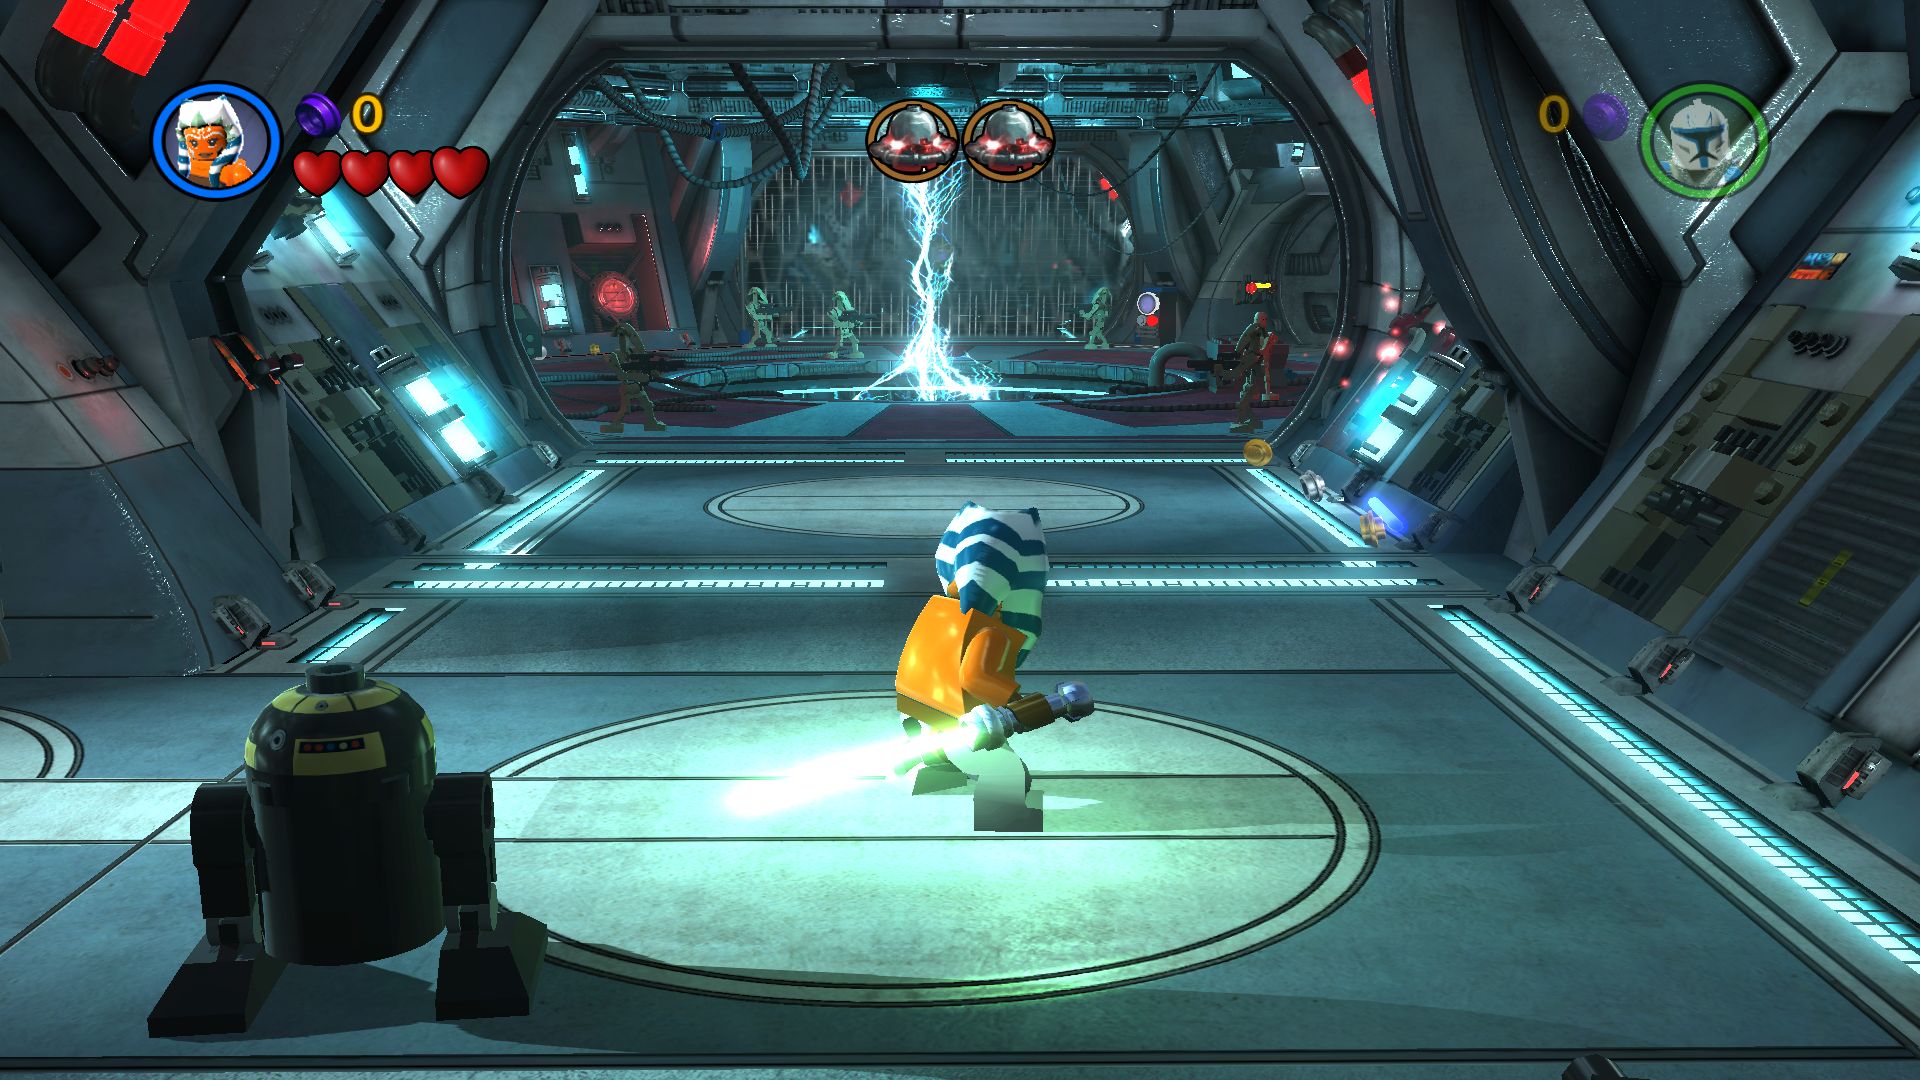 star wars the clone wars lego game